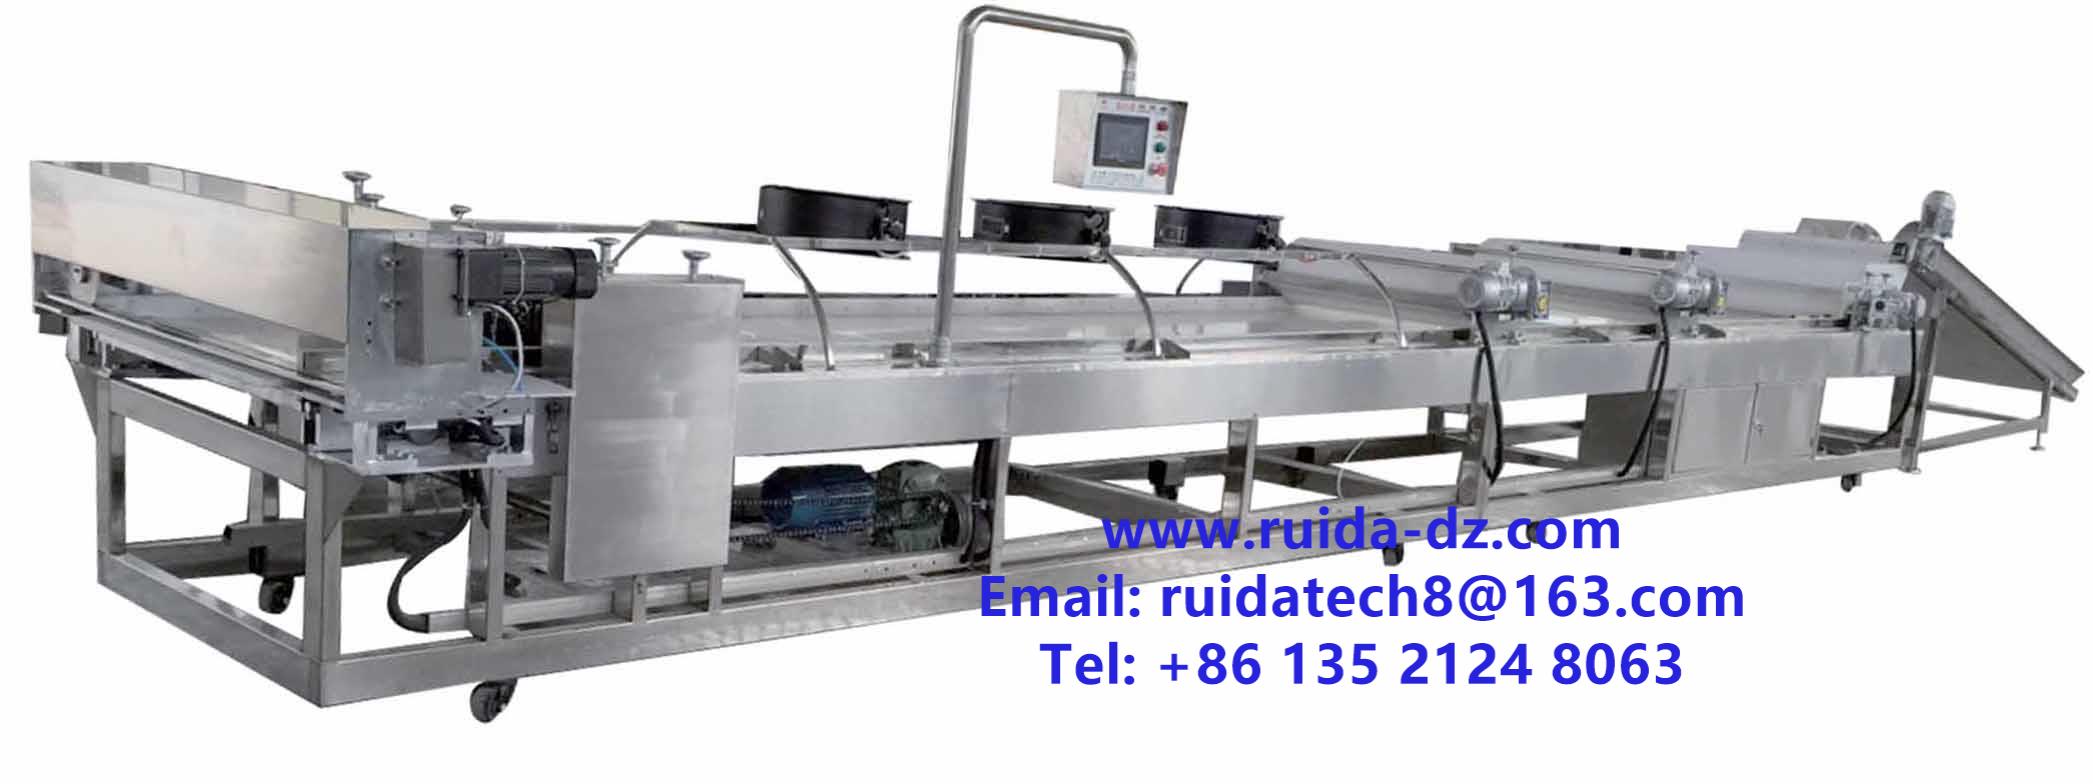 Automatic forming cutting machine, Automatic forming machine & Cutting Machine